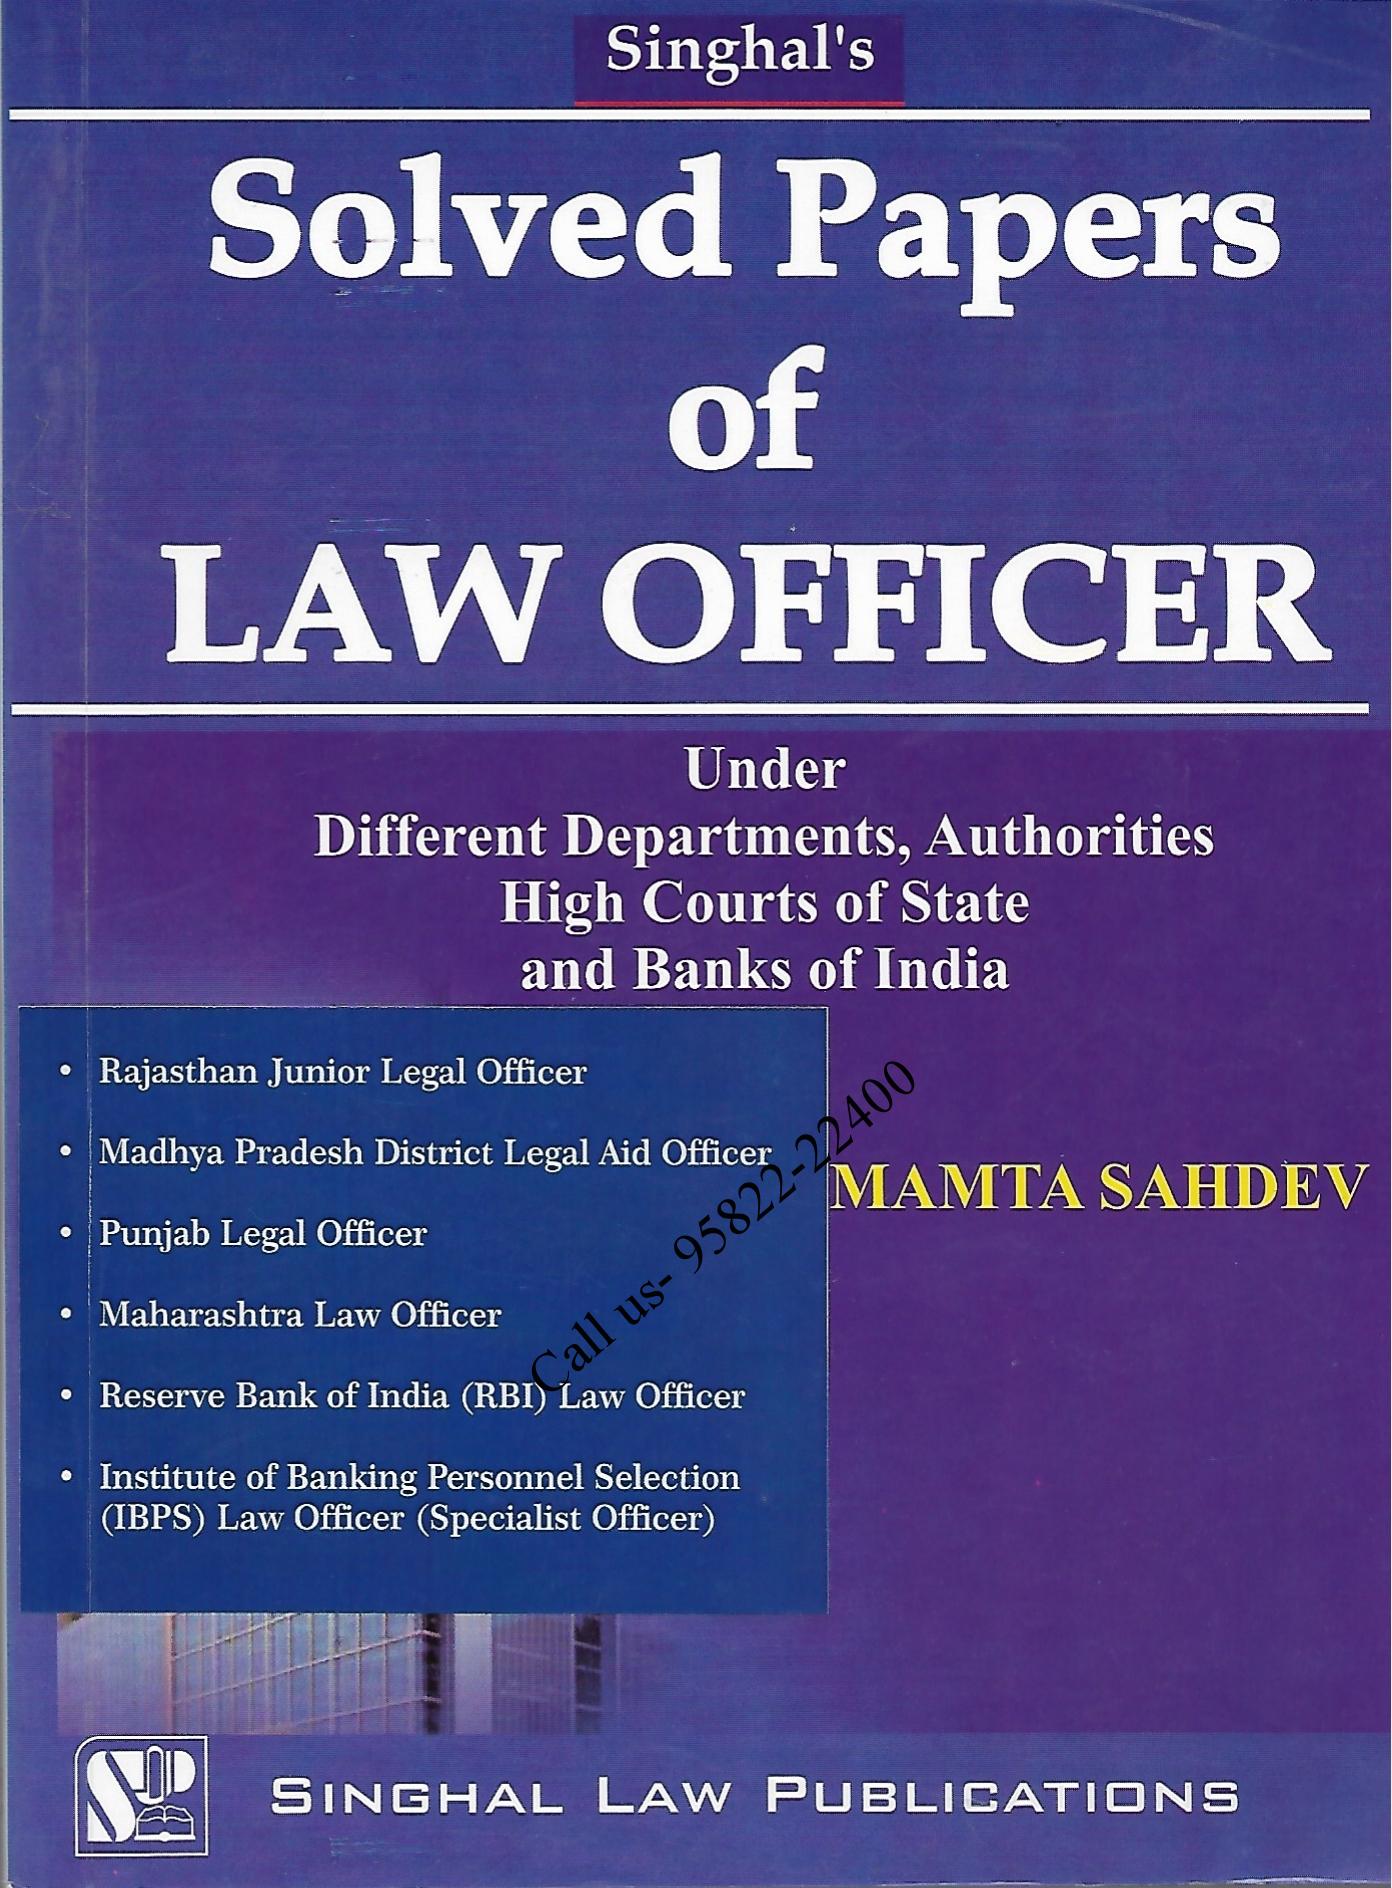 Singhal’s Solved Paper Of Law Officer by Mamta Sahdev